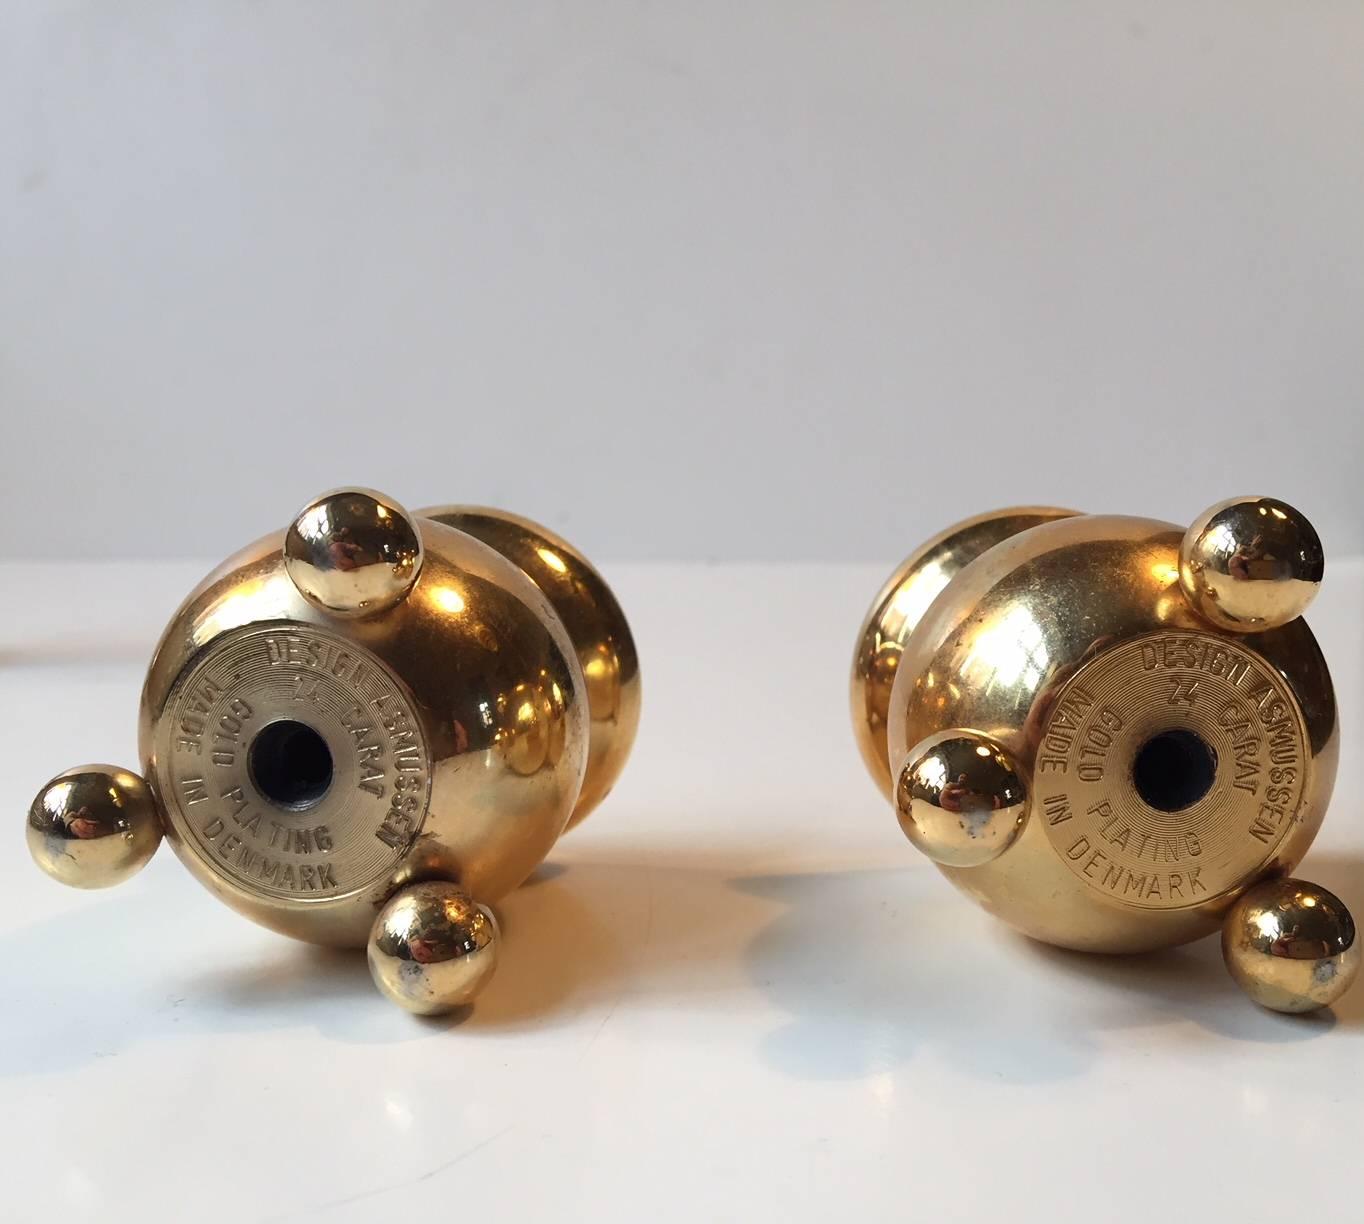 This set of two small cauldron-shaped 24-karat gold-plated candle holders was designed by Hugo Asmussen and manufactured by Asmussen in Denmark in the 1960s. Despite their small size, the candle holders require regular sized candles.